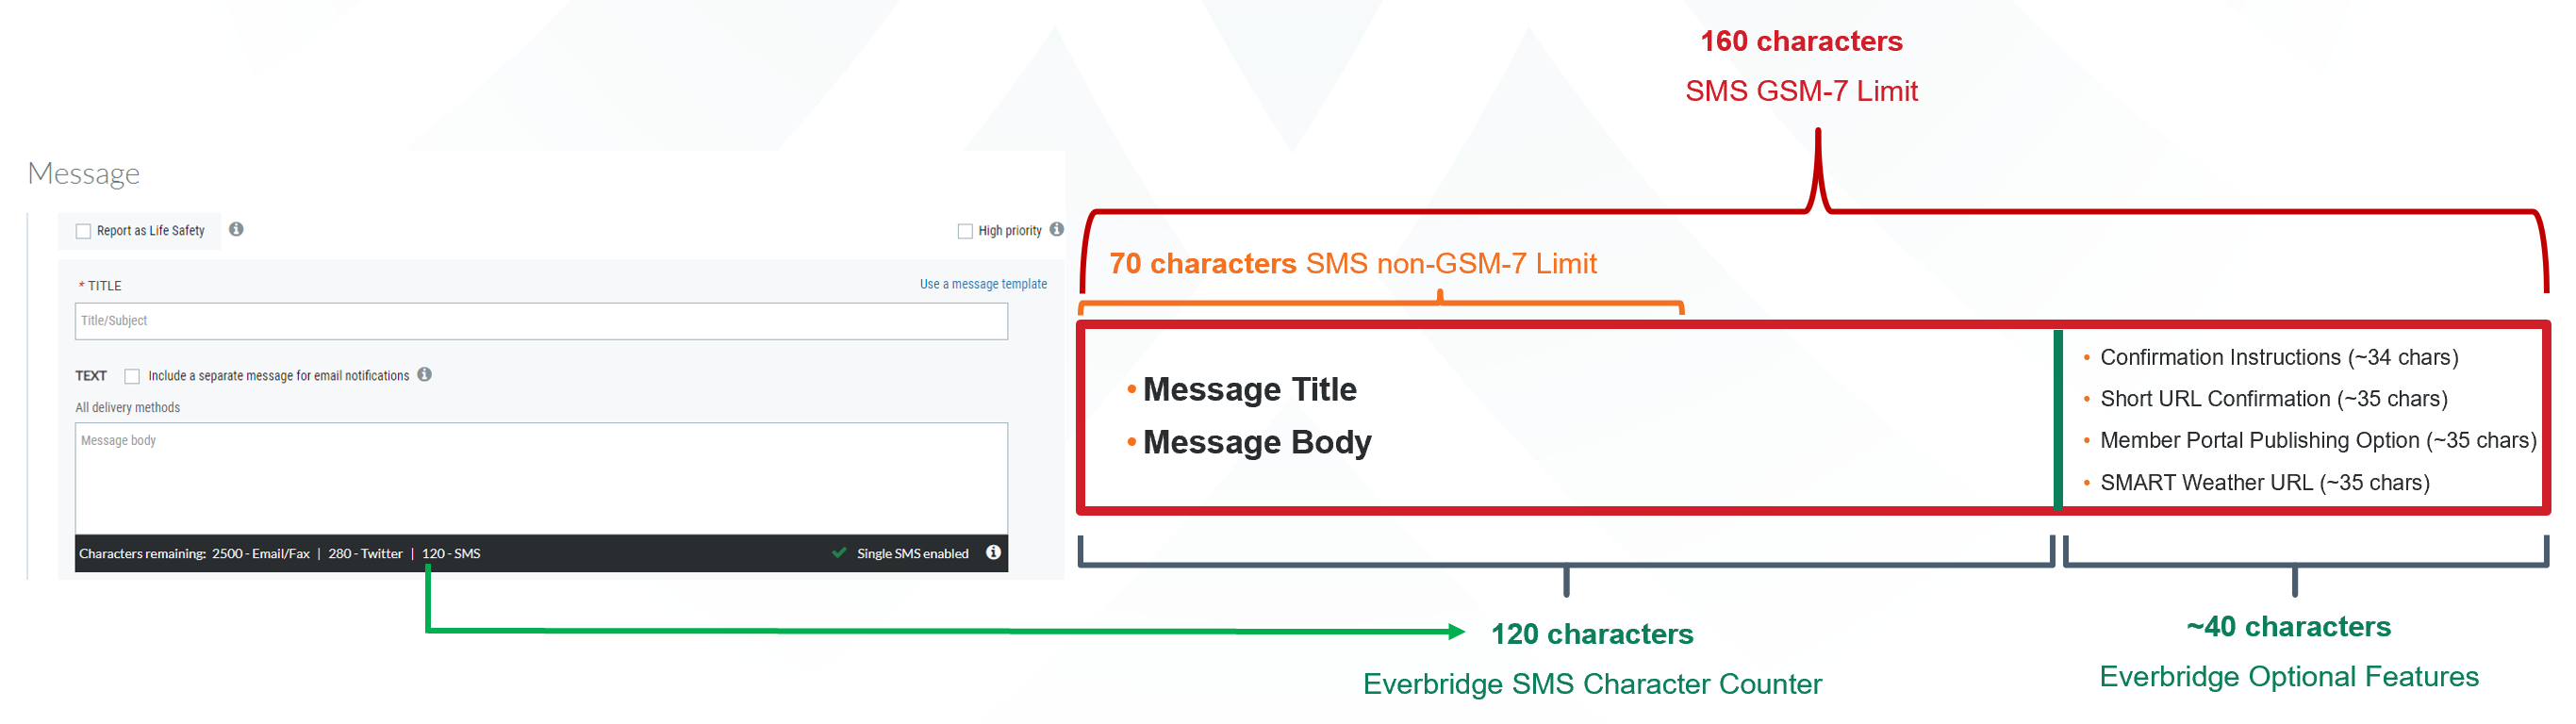 Why does Everbridge show 120 as the SMS Character Counter when Single SMS supports 160